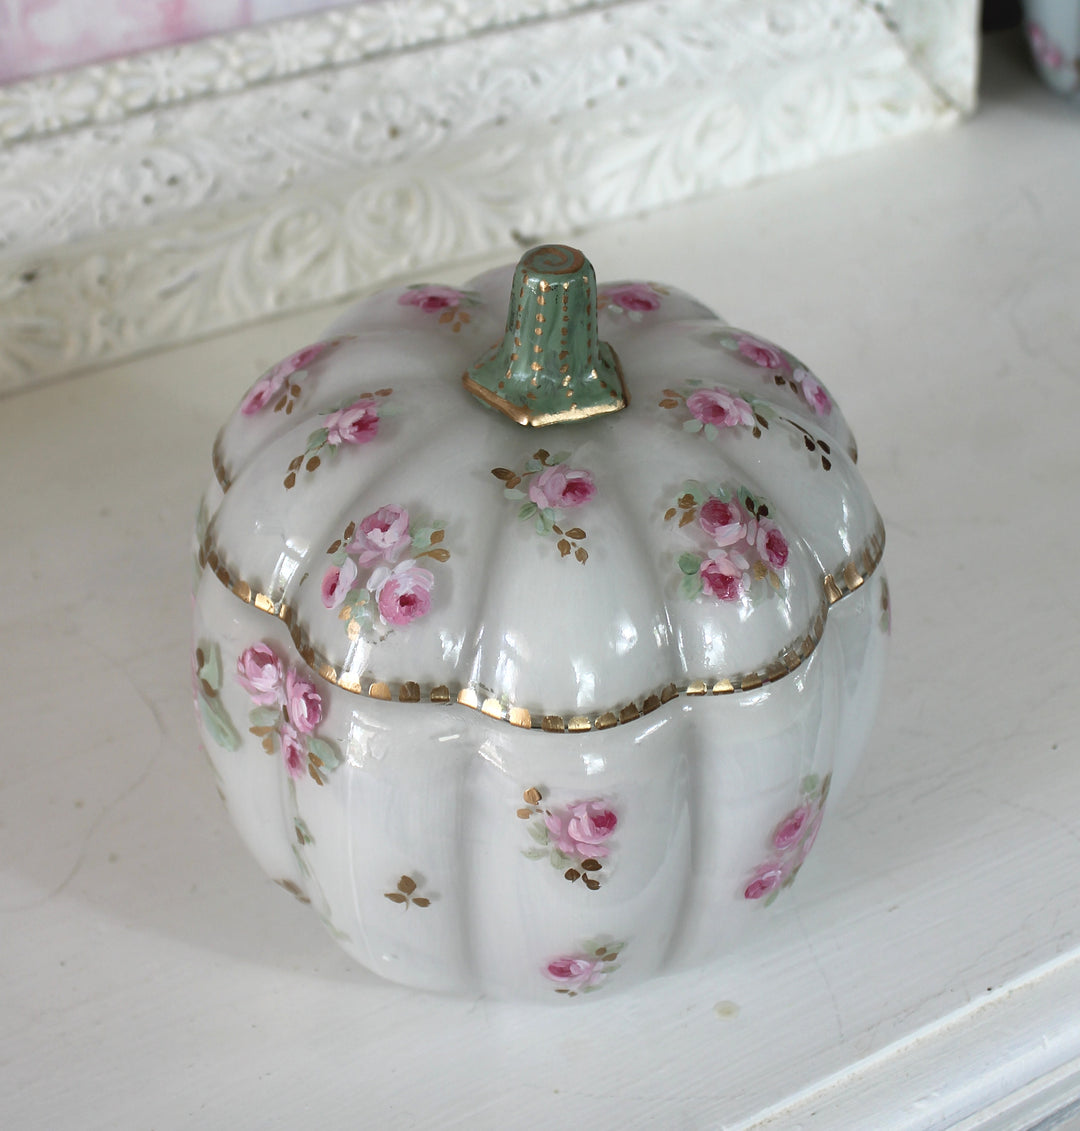 Shabby Chic Hand Painted Roses Glass Pumpkin Original by Debi Coules Romantic Cottage